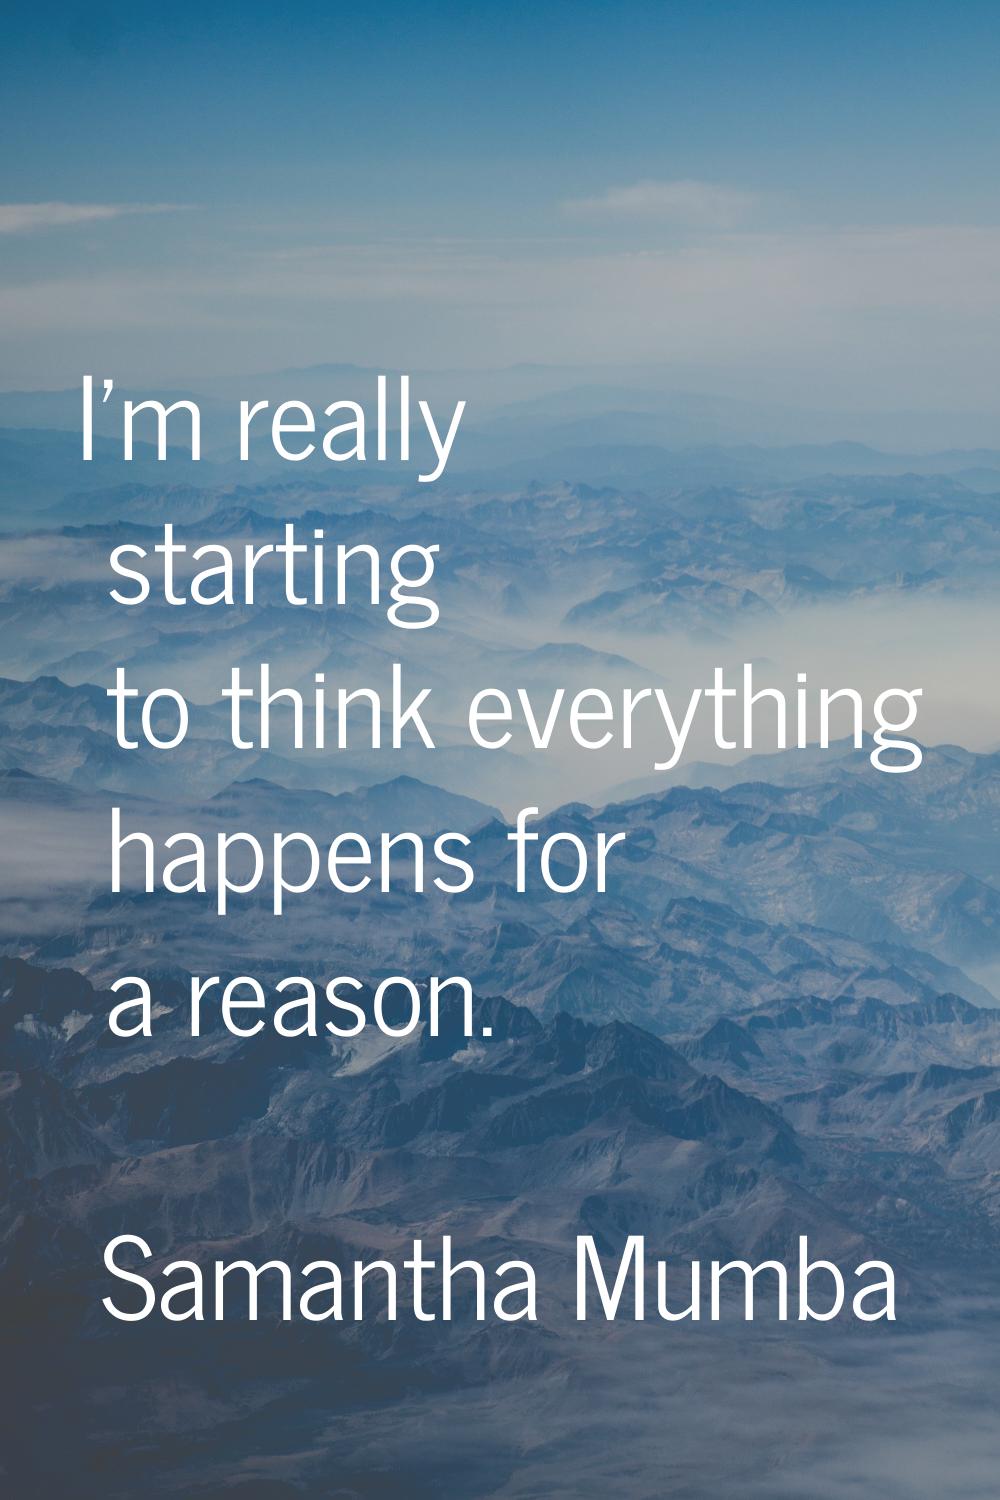 I'm really starting to think everything happens for a reason.